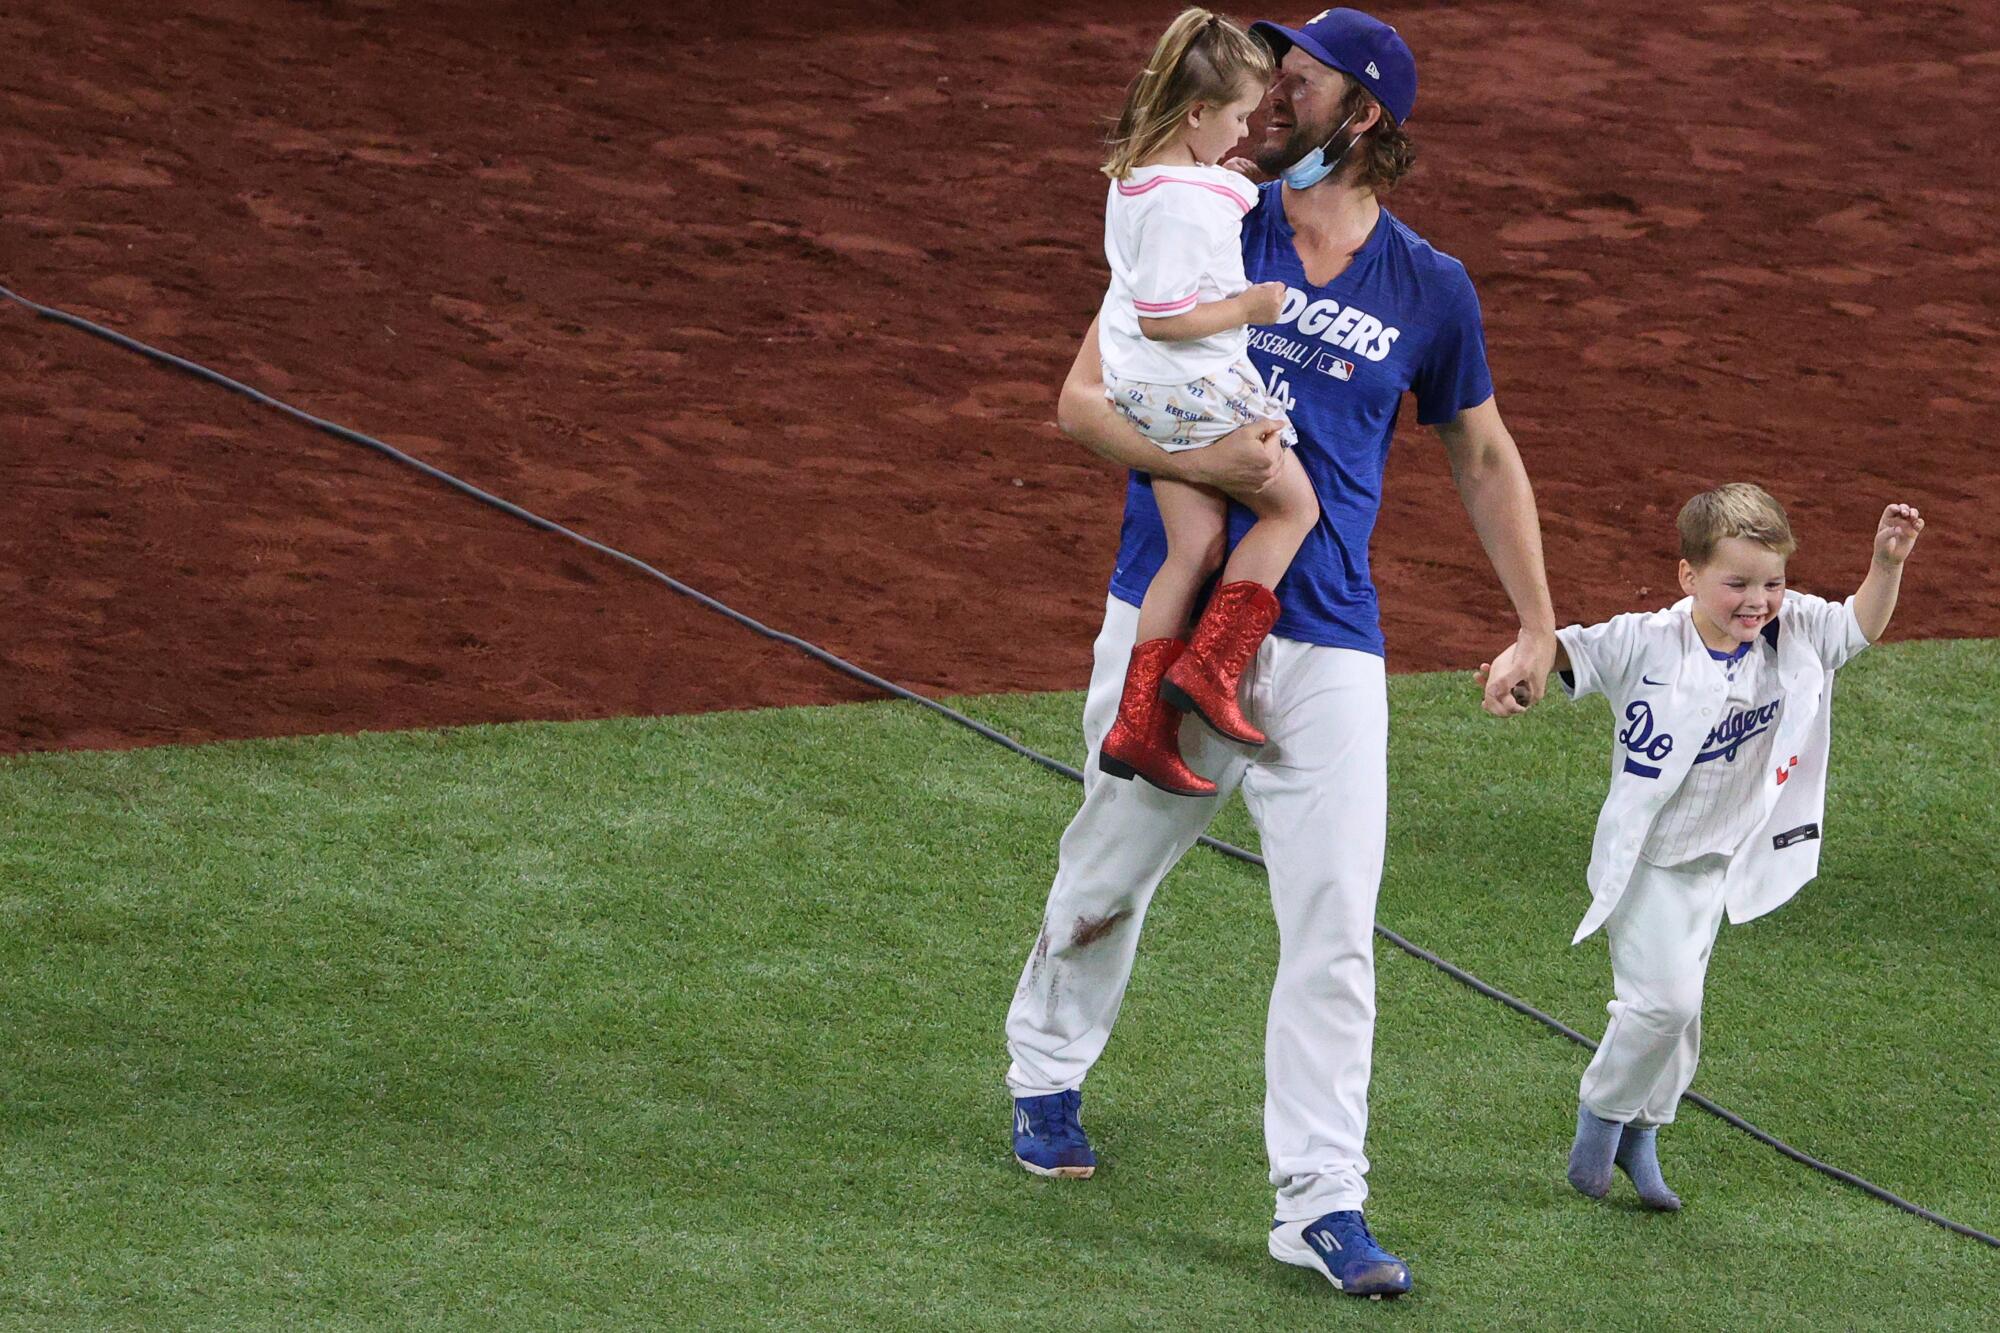 Clayton Kershaw celebrates with daughter Cali and son Charley after the Dodgers won the 2020 World Series.